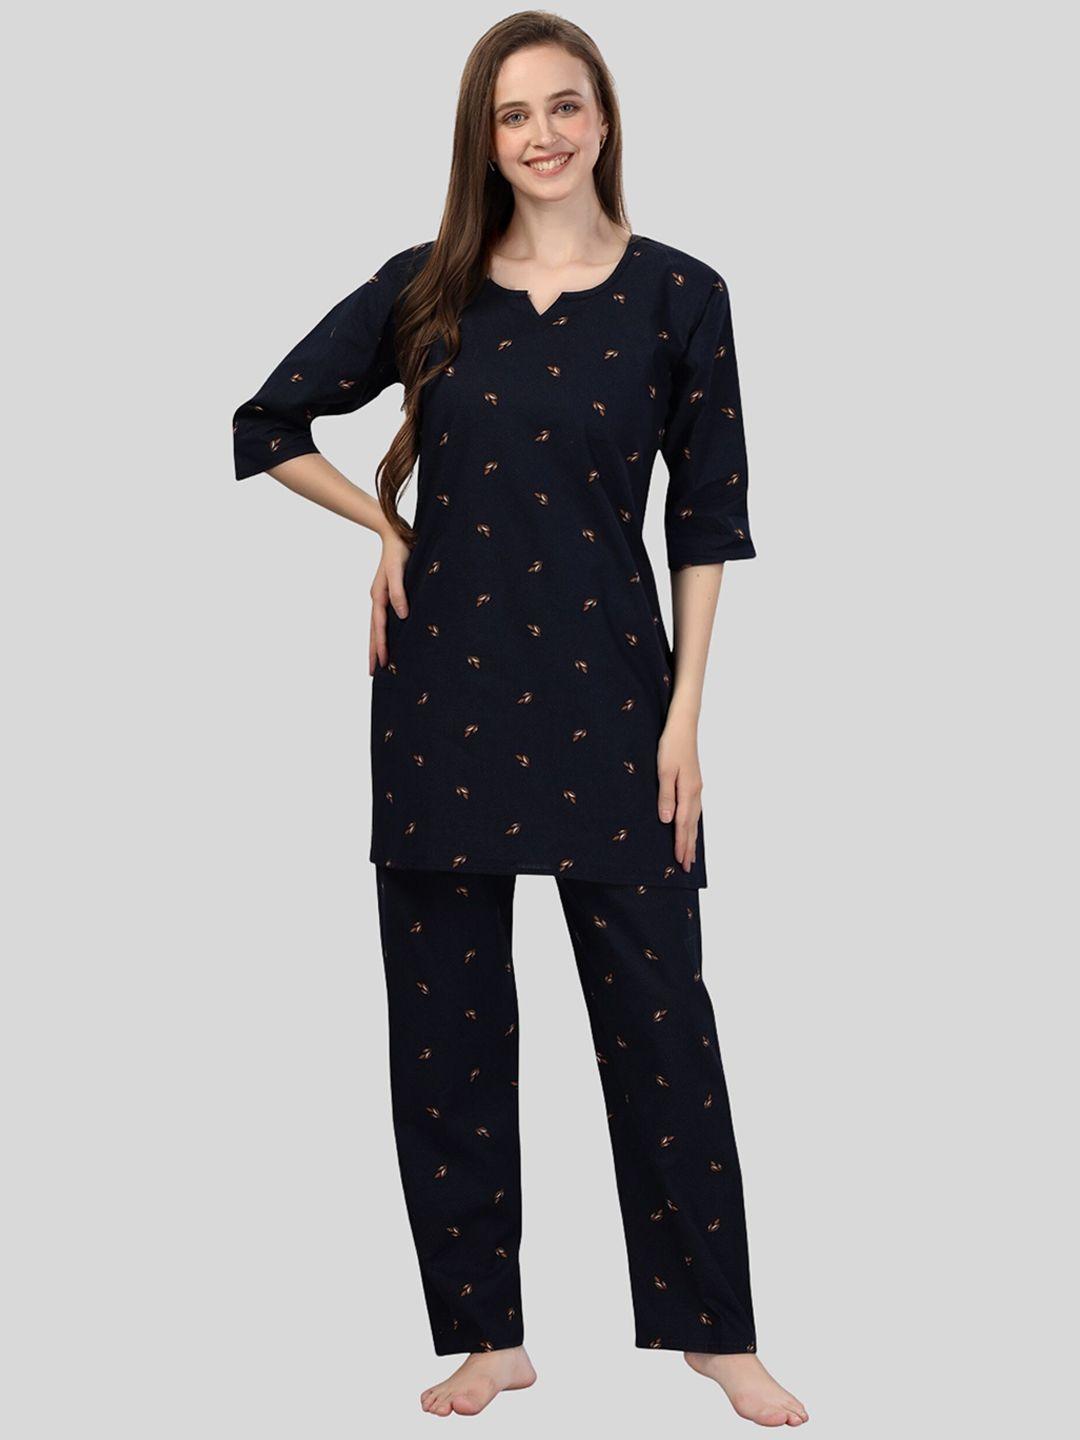 fabme printed pure cotton night suit